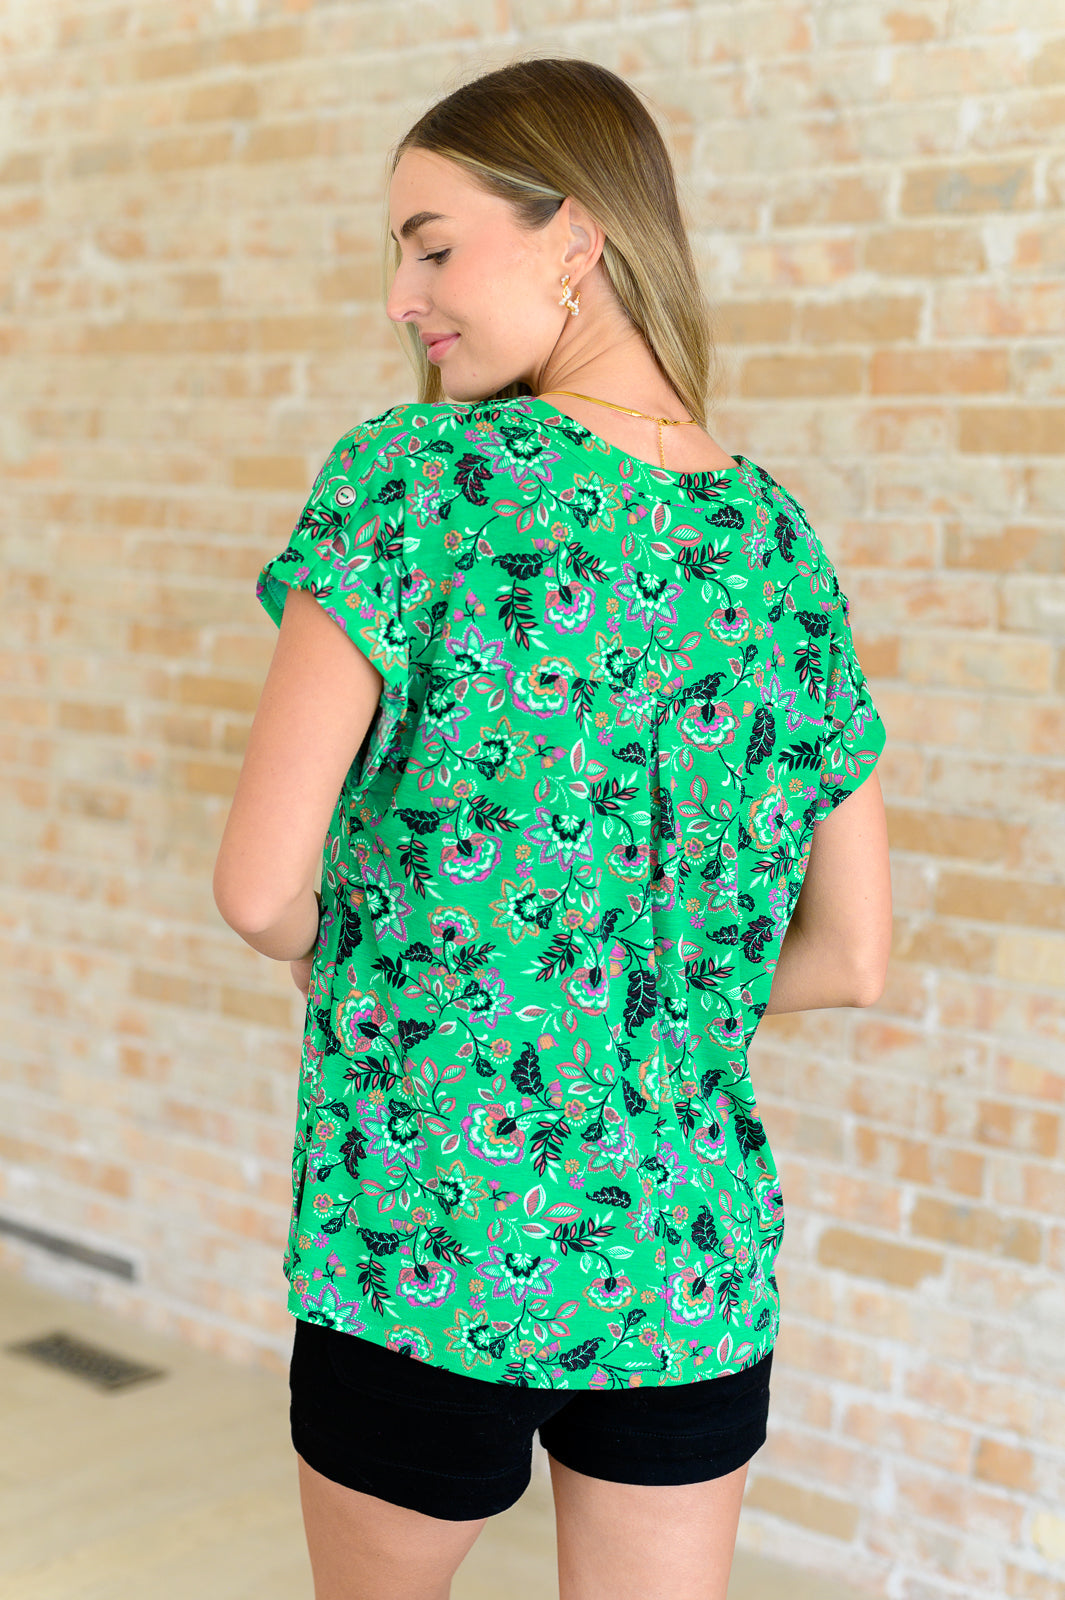 Lizzy Cap Sleeve Top in Green and Black Floral